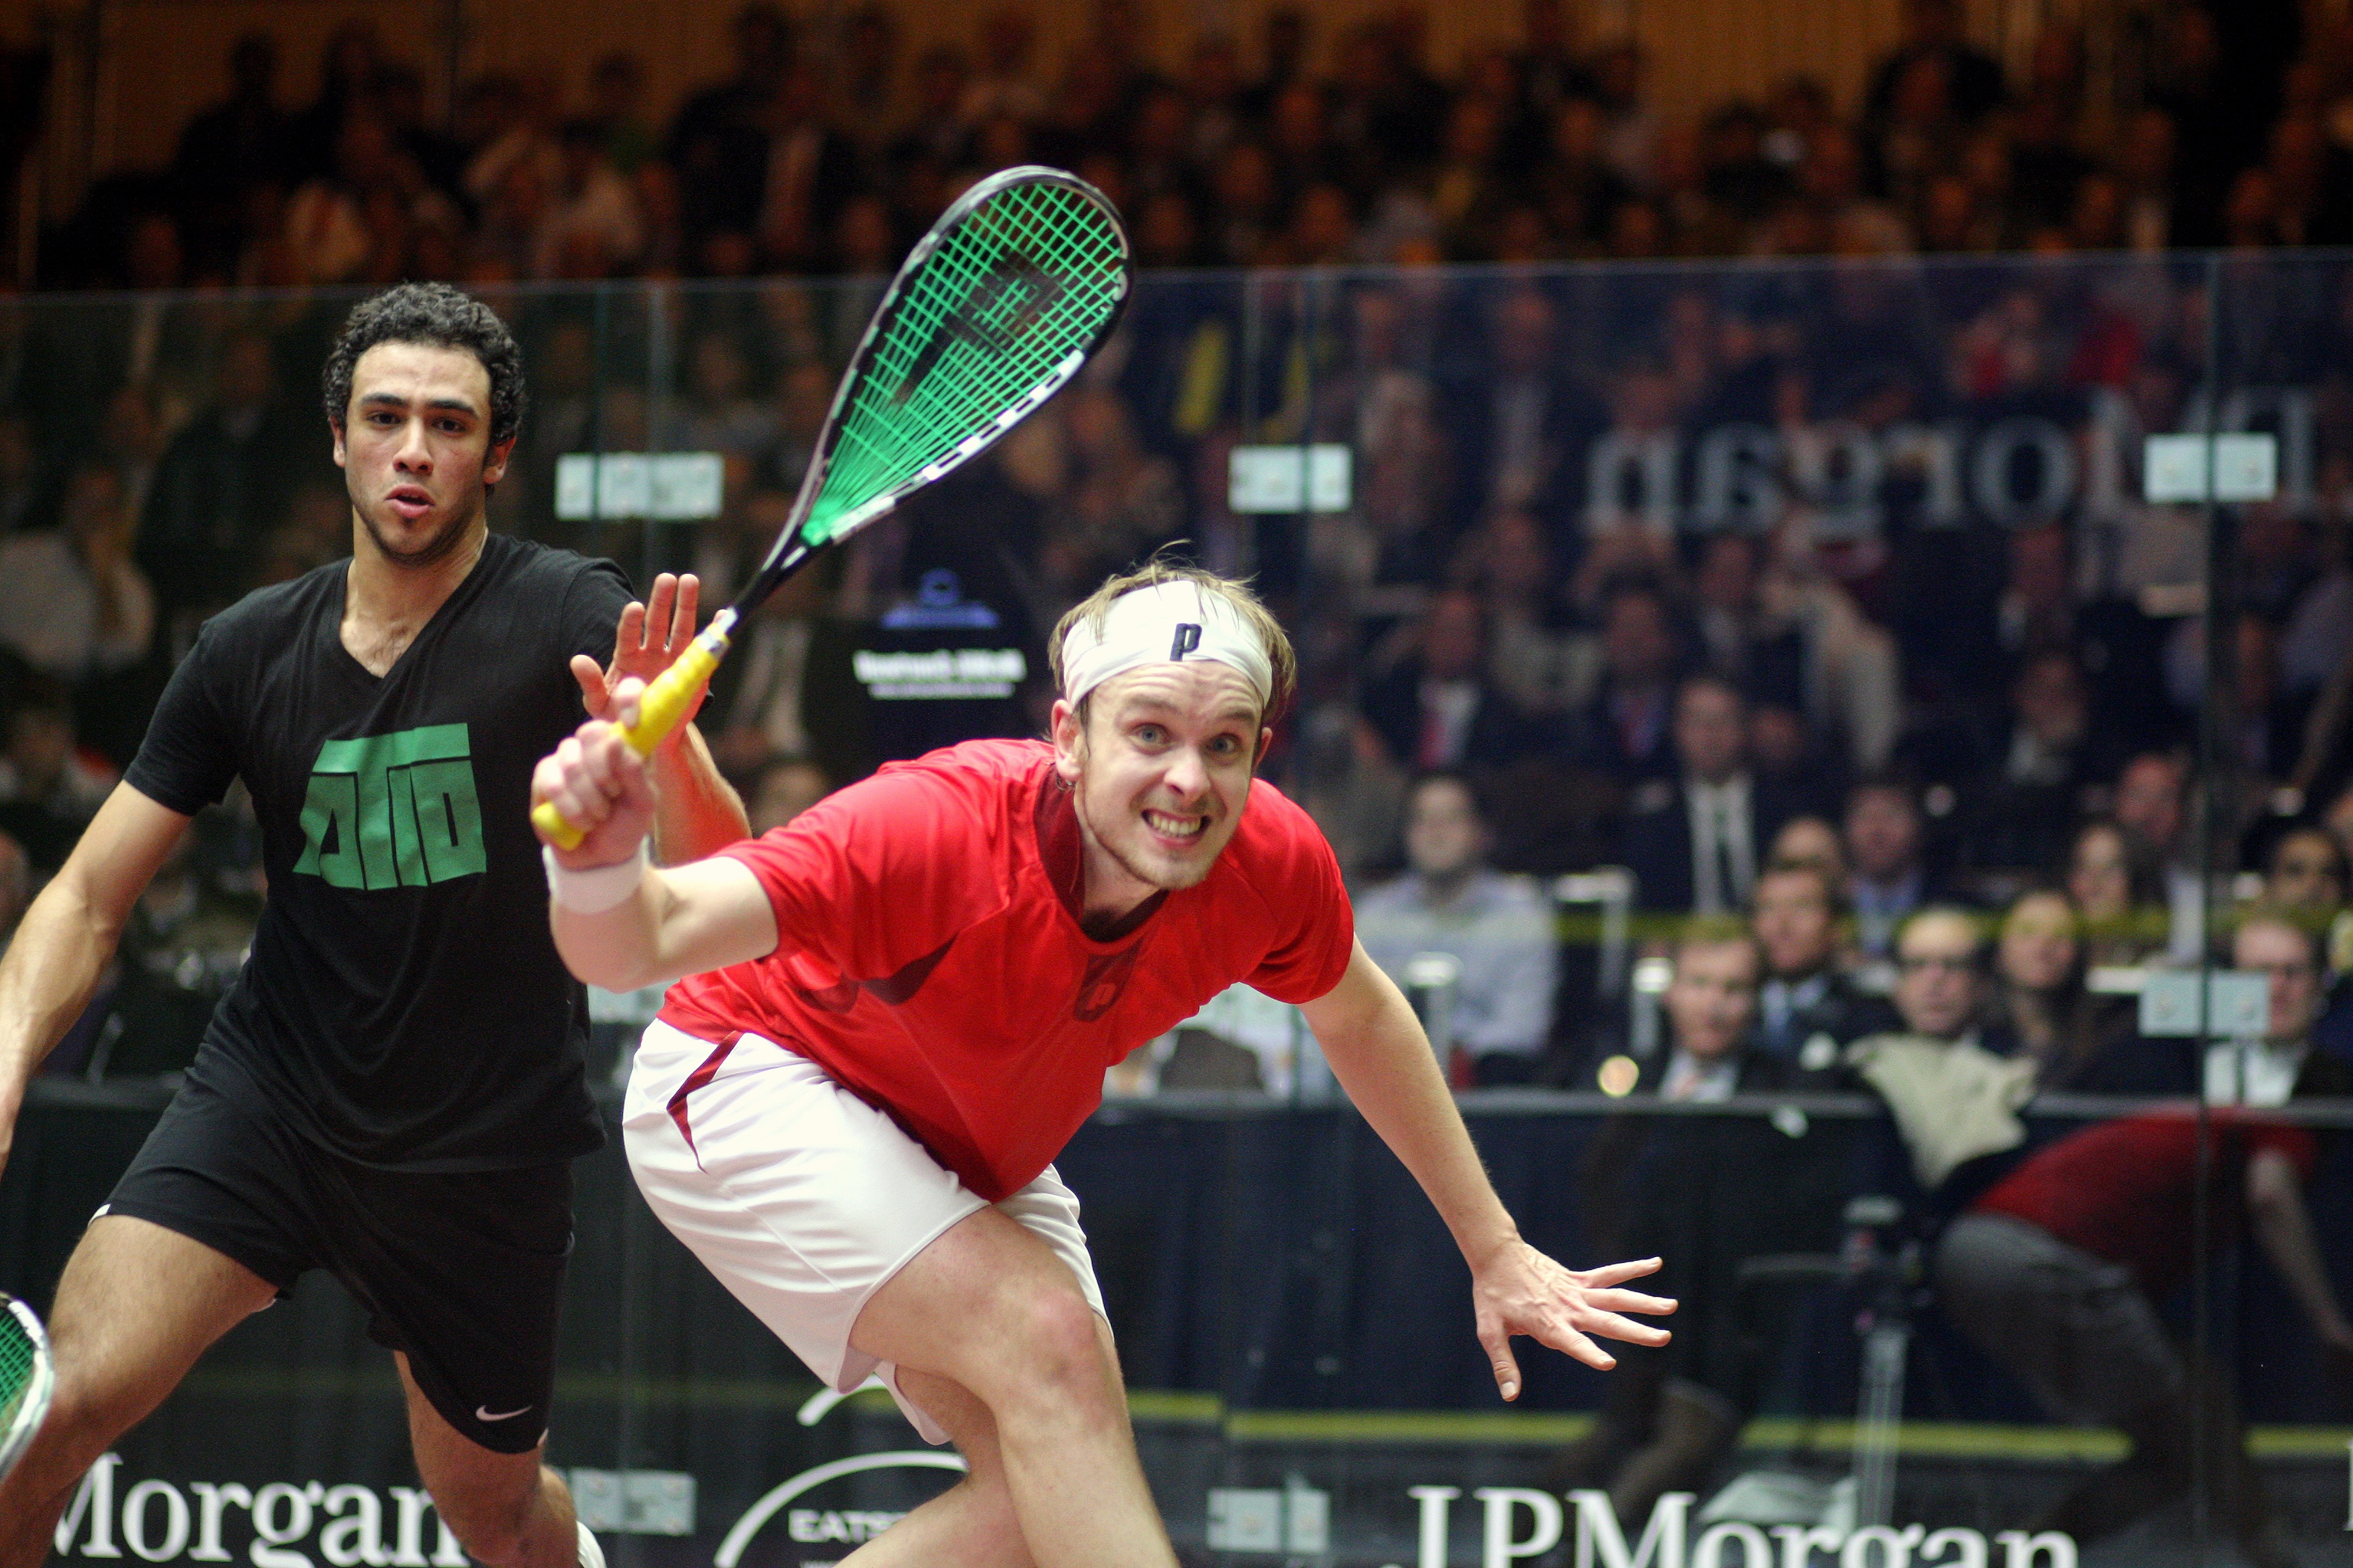 In 2008, Ramy Ashour (L) and James Willstrop put on a 70-minute train wreck that left both players and fans alike exhausted. On full display was the creative shot-making prowess that both have become synonomous for. This time around, in the final of the J.P. Morgan Tournament of Champions, Willstrop not only pulled out uncanny shots at opportune moments, but more impressive was his patient ability to take all angles away from Ashour who simply had nothing to work with.